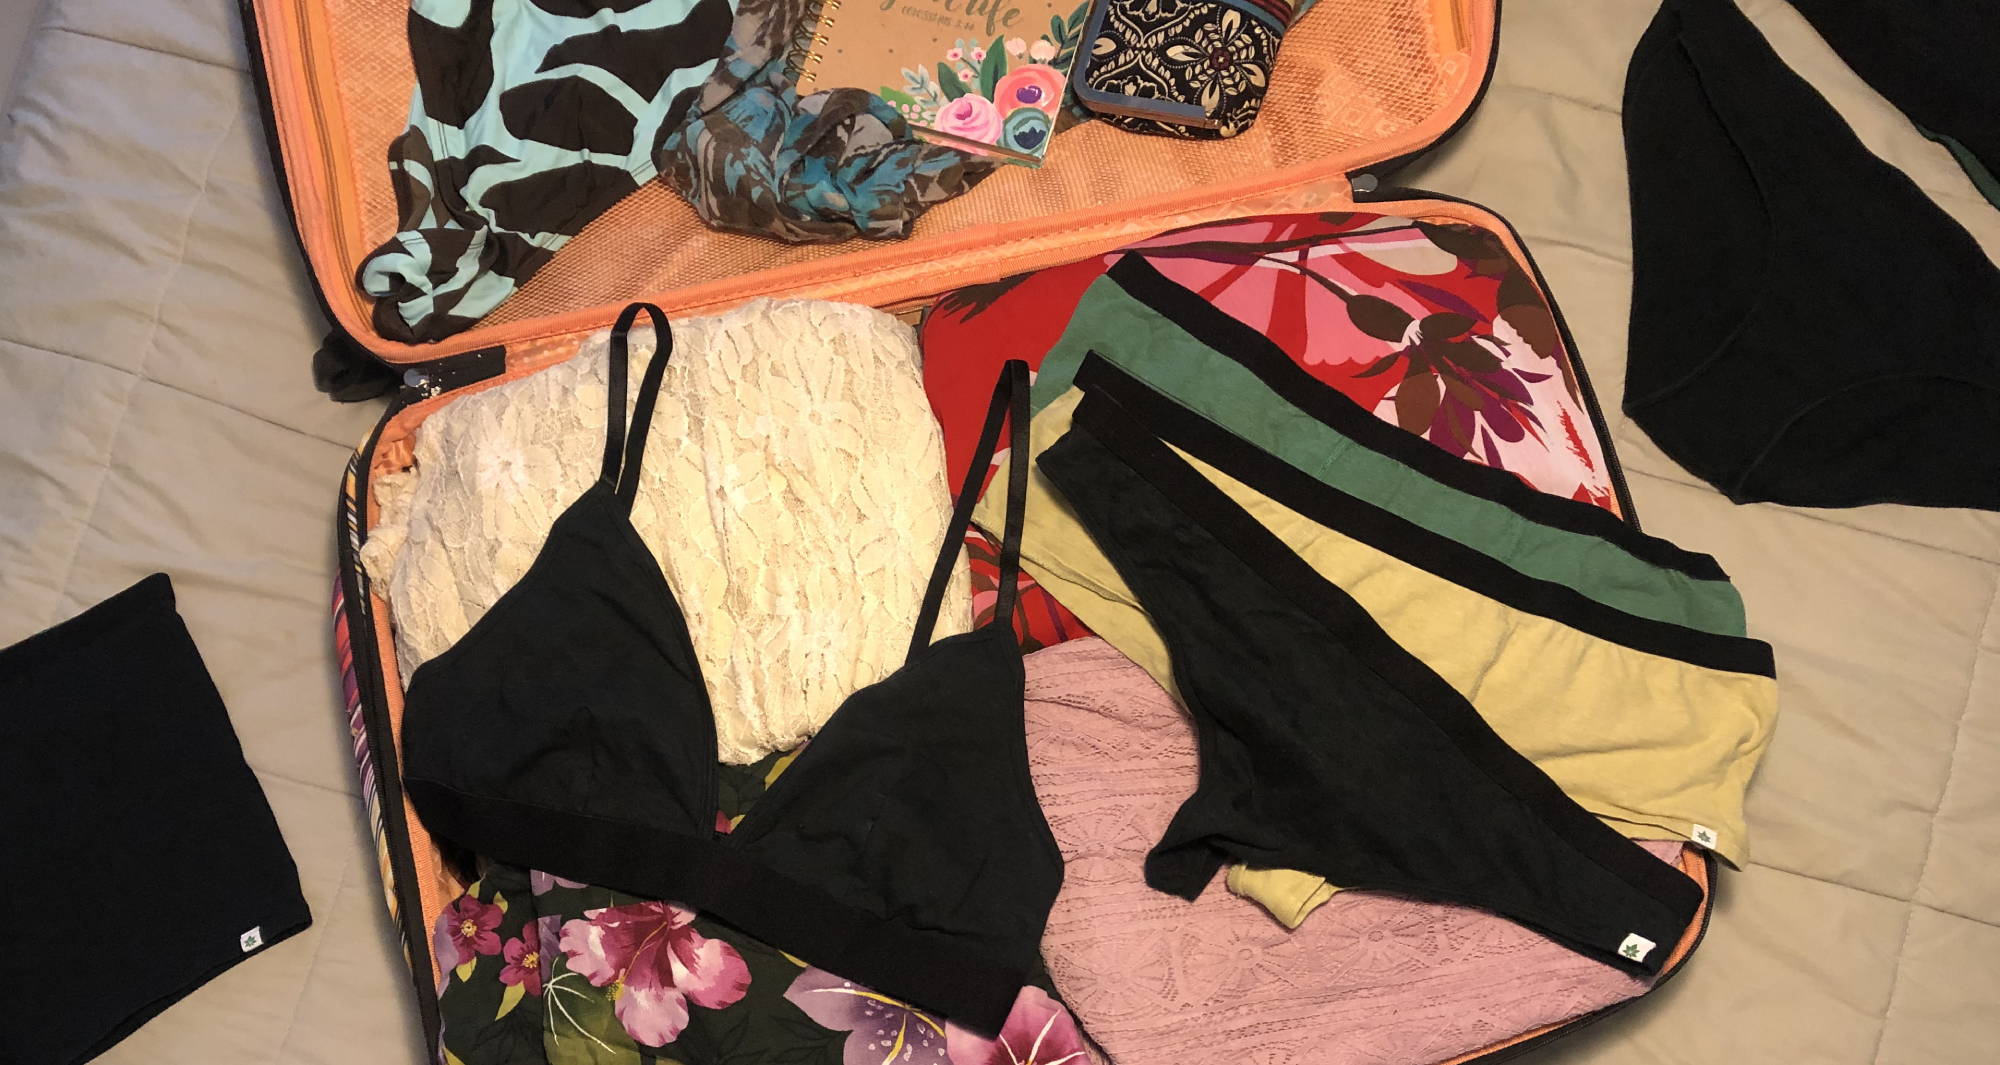 Open suitcase full of clothes with a black bralette and black thong laid on top.